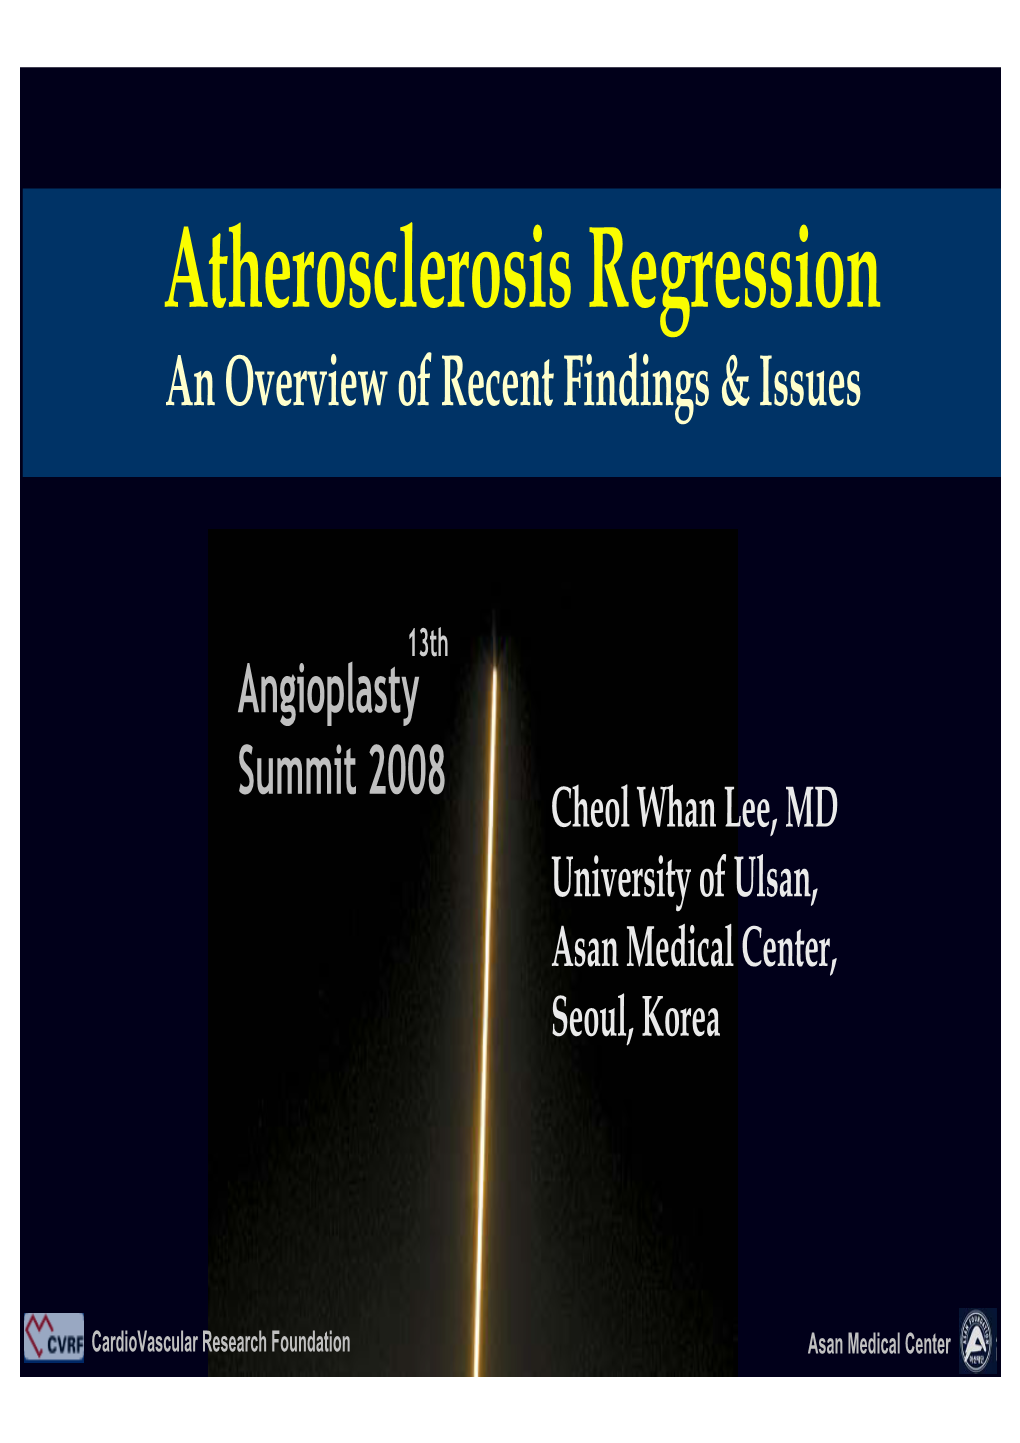 Atherosclerosis Regression an Overview of Recent Findings & Issues